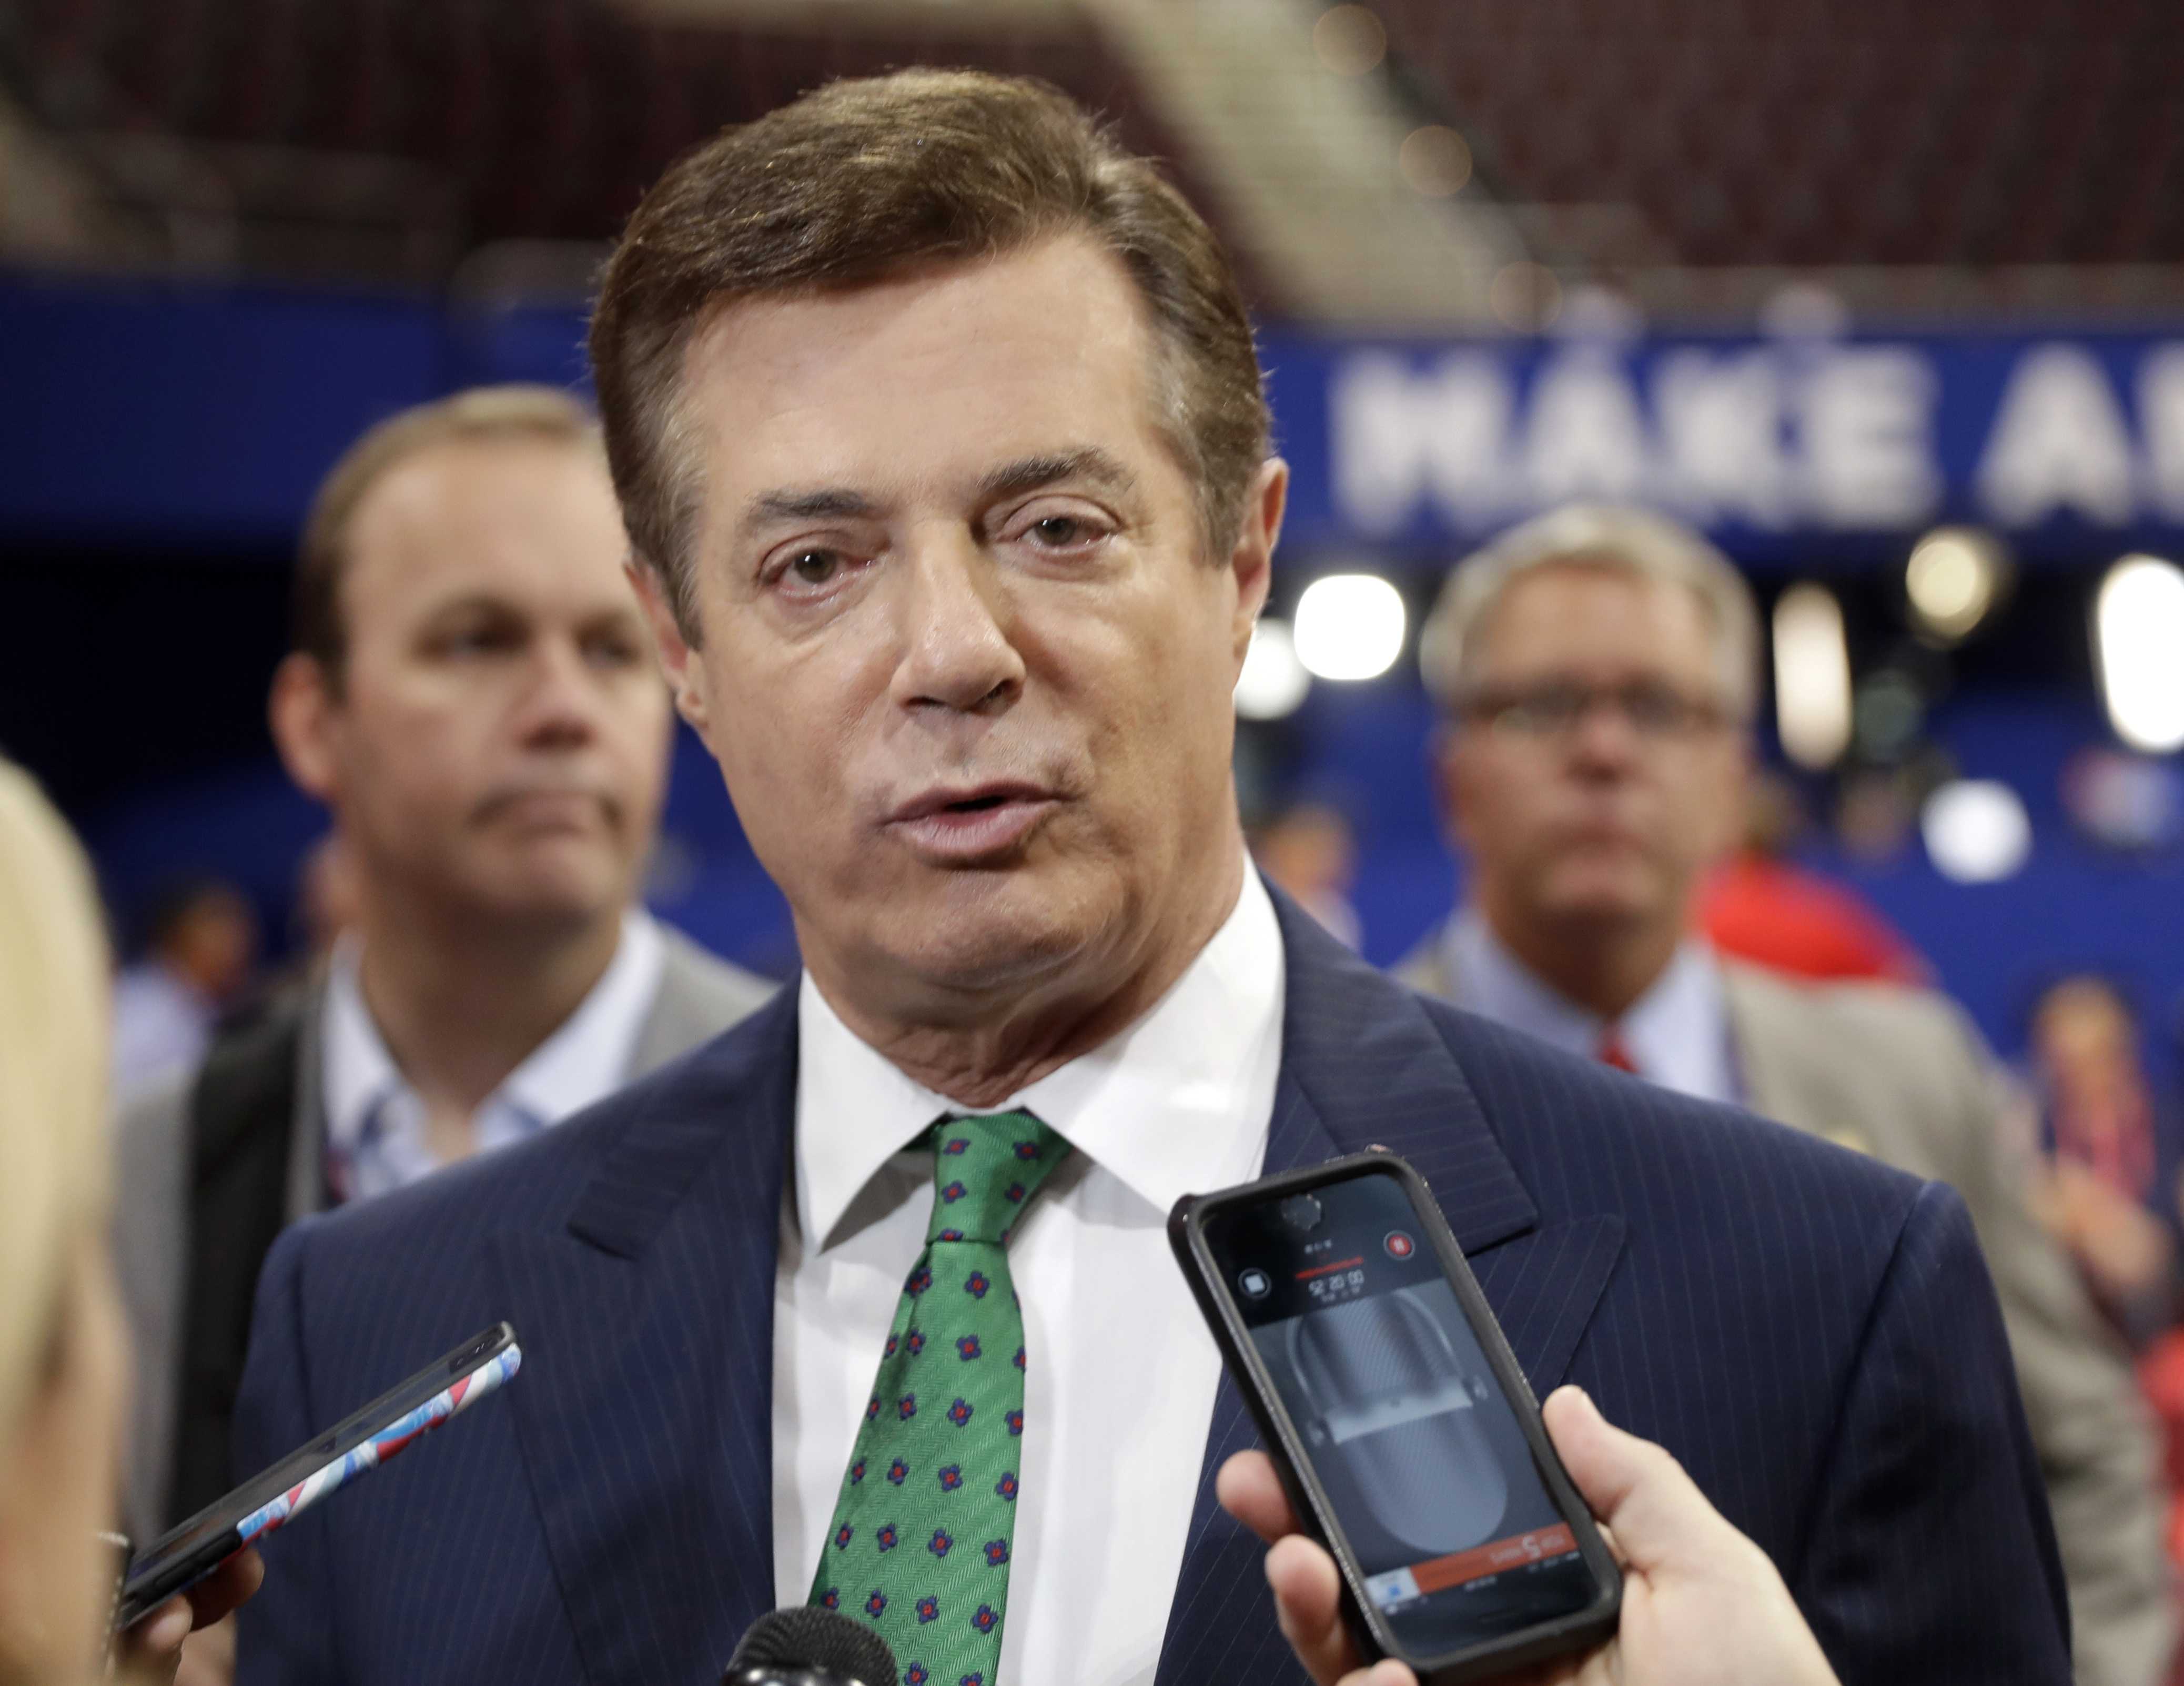 Emails show Manafort offered to give Russian 'private briefings' on campaign